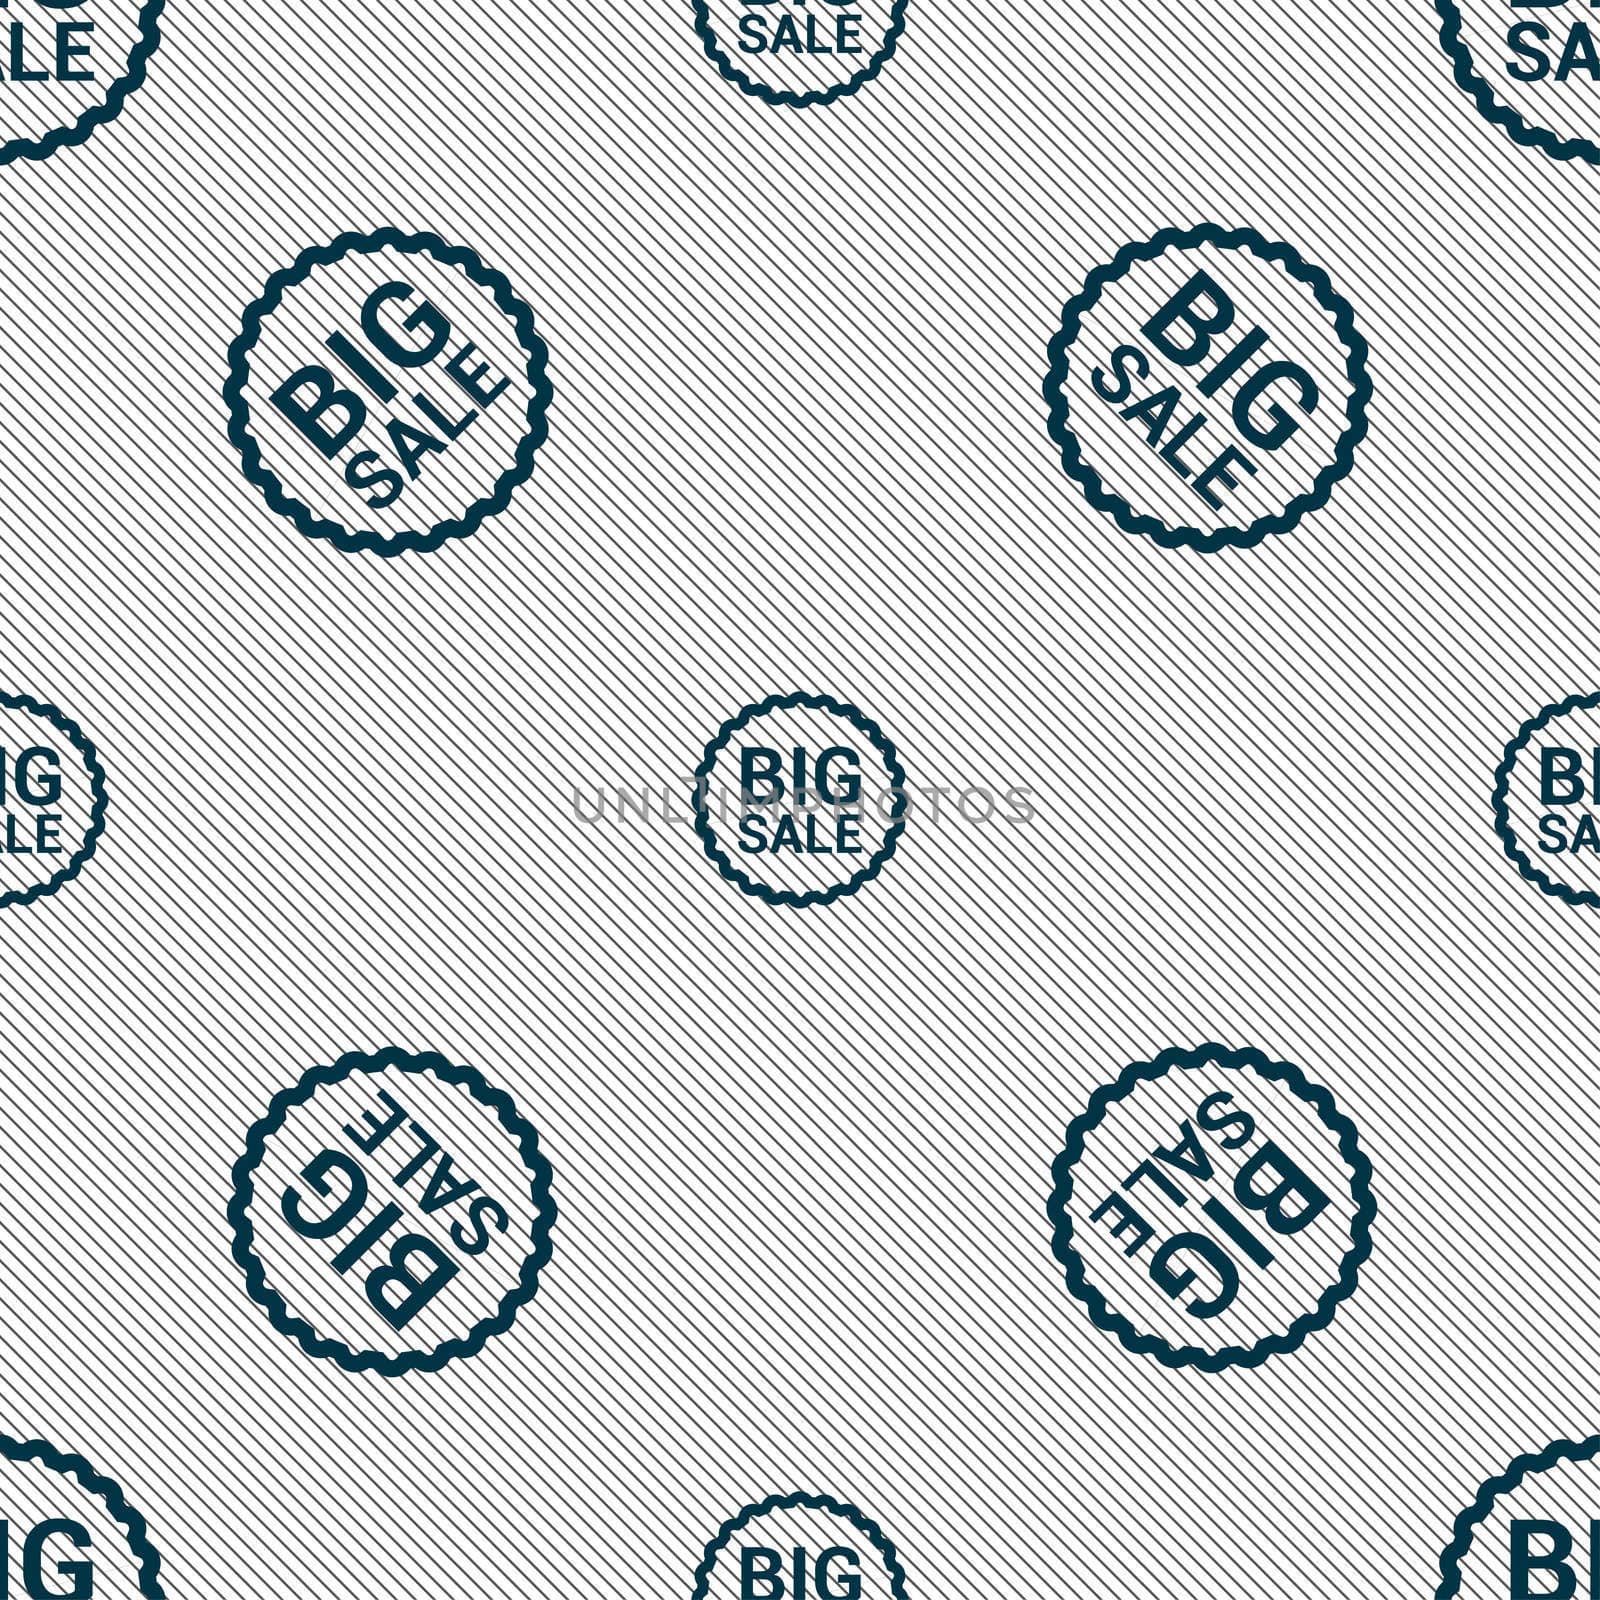 Big sale icon sign. Seamless pattern with geometric texture. illustration